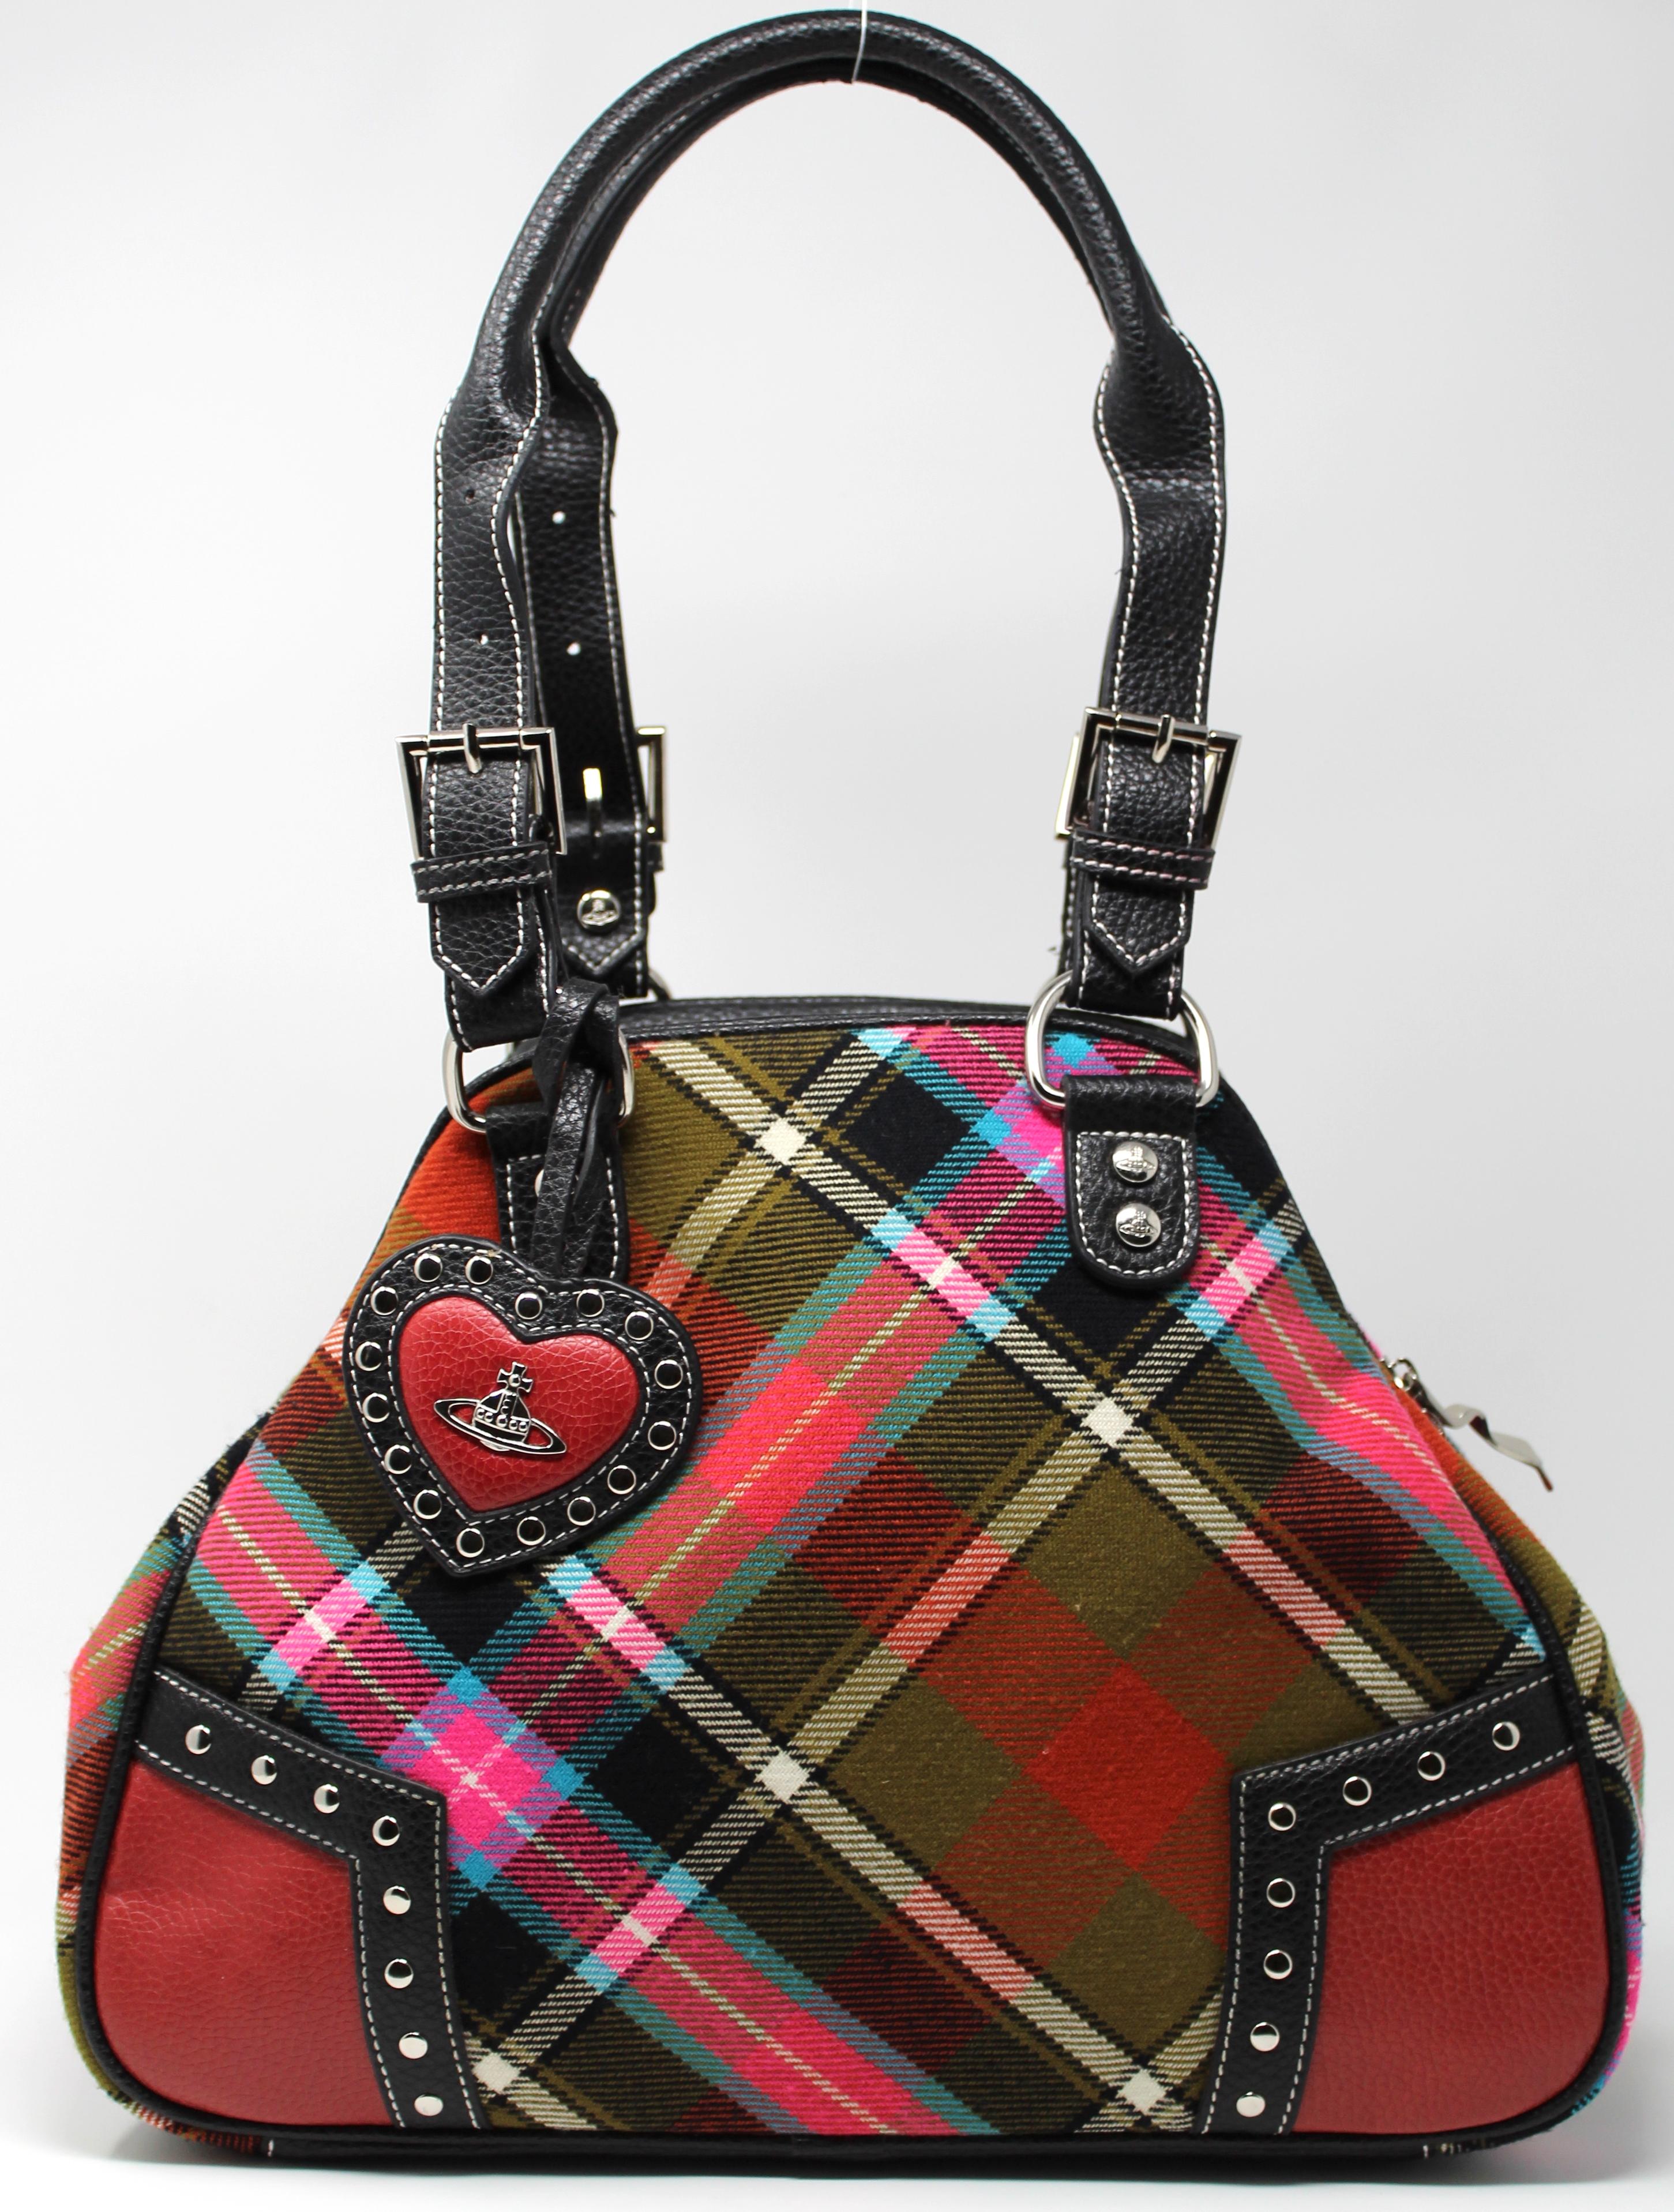 -Made in Italy, 100% genuine leather
-Tartan wool cloth, in array of colors
-Has hanging heart charm with studs all over
-All hardware is branded, grey orb lining
-Zip closure, one zip compartment inside

Condition:
-Good, shows minor signs of wear.